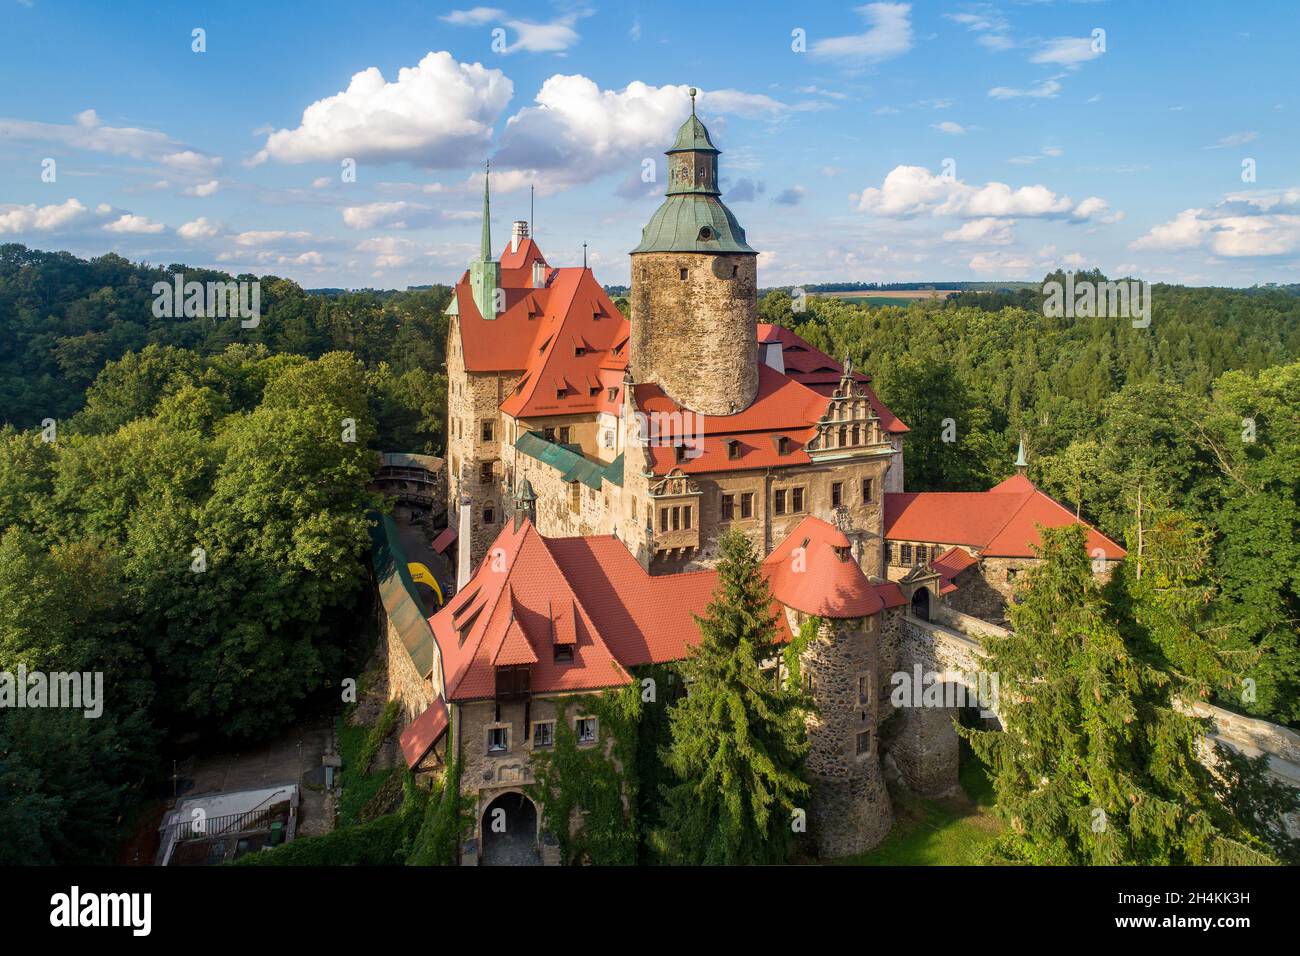 Czocha (Tzchocha) medieval castle in Lower Silesia in Poland. Built in 13th century (the main keep) with many later additions. Aerial view in summer i Stock Photo